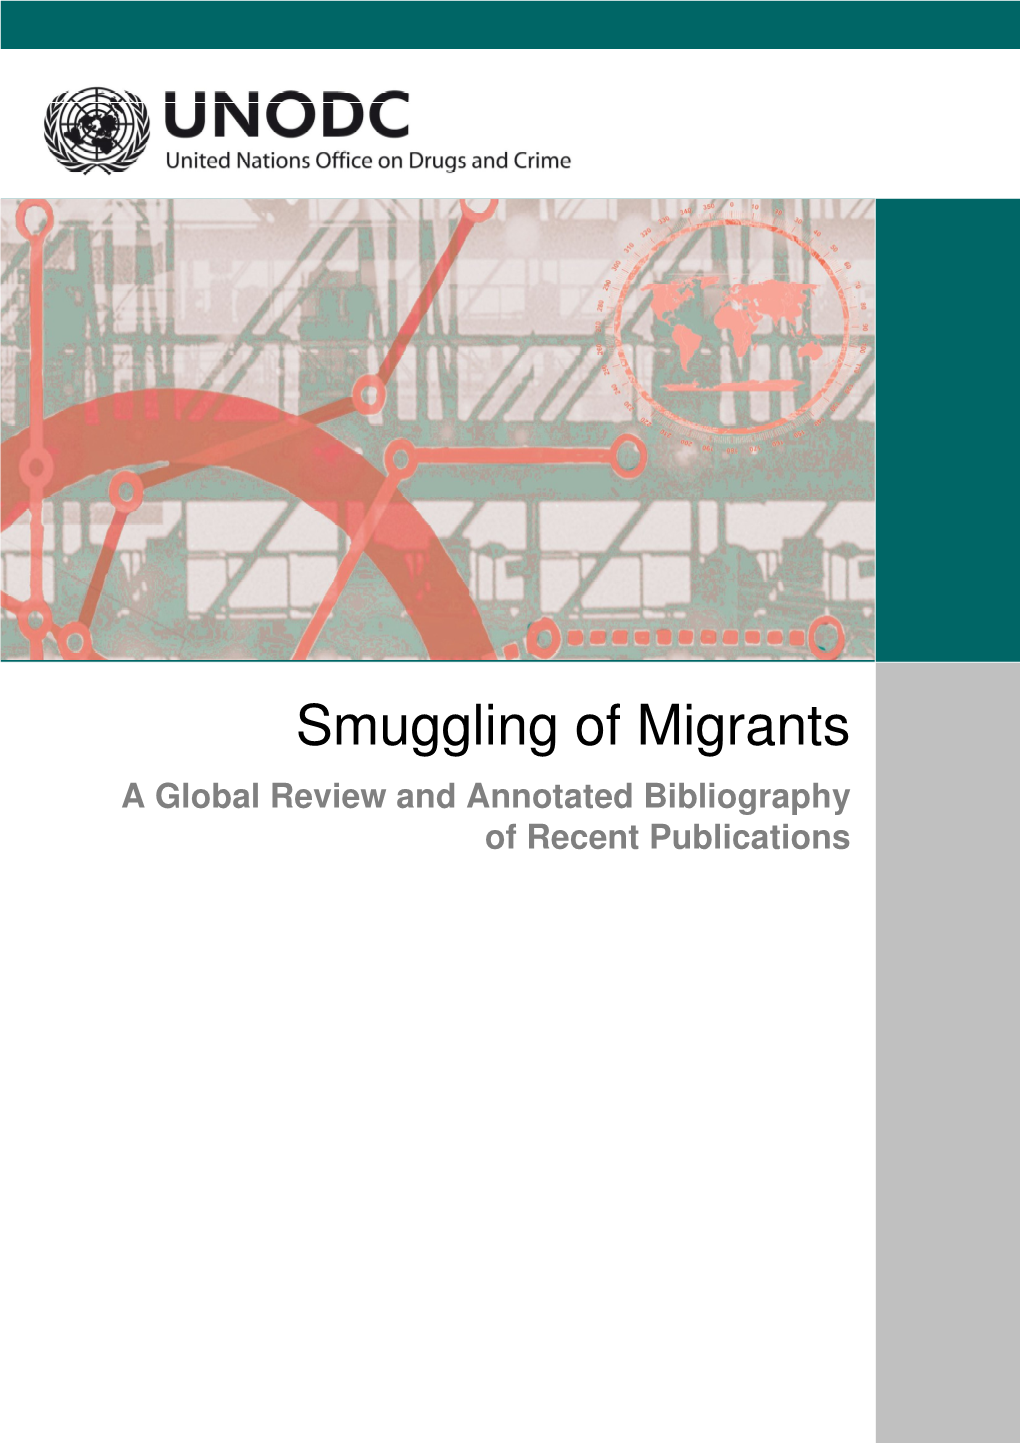 Smuggling of Migrants a Global Review and Annotated Bibliography of Recent Publications